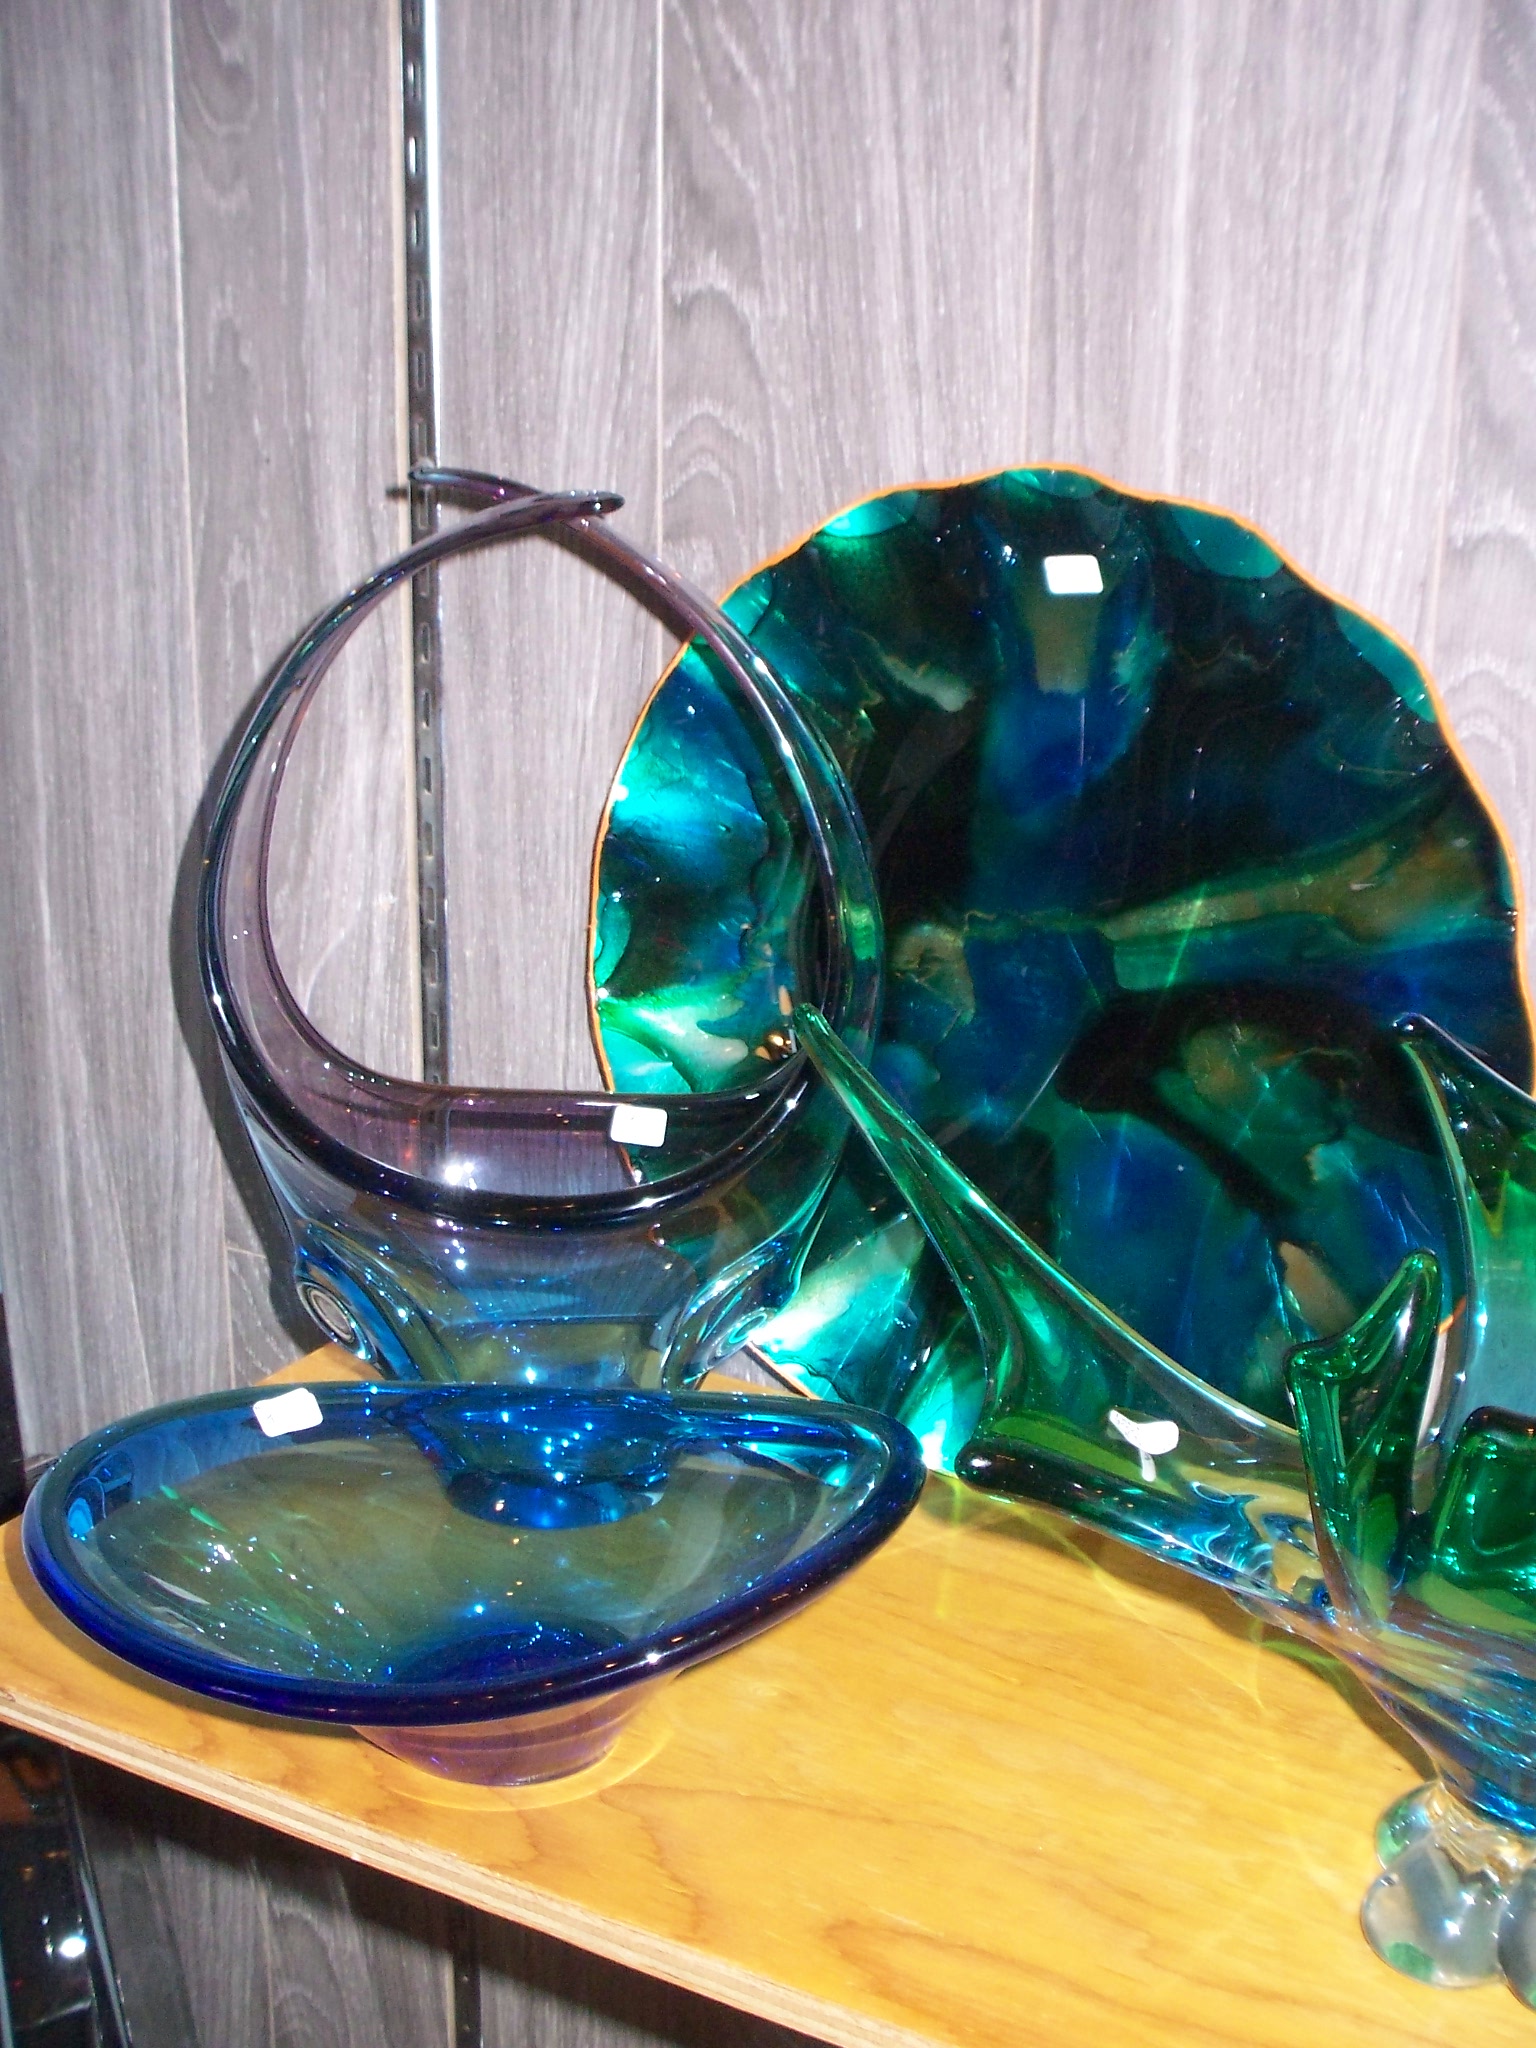 There's also a great selection of accessories like these beautiful glass pieces. 